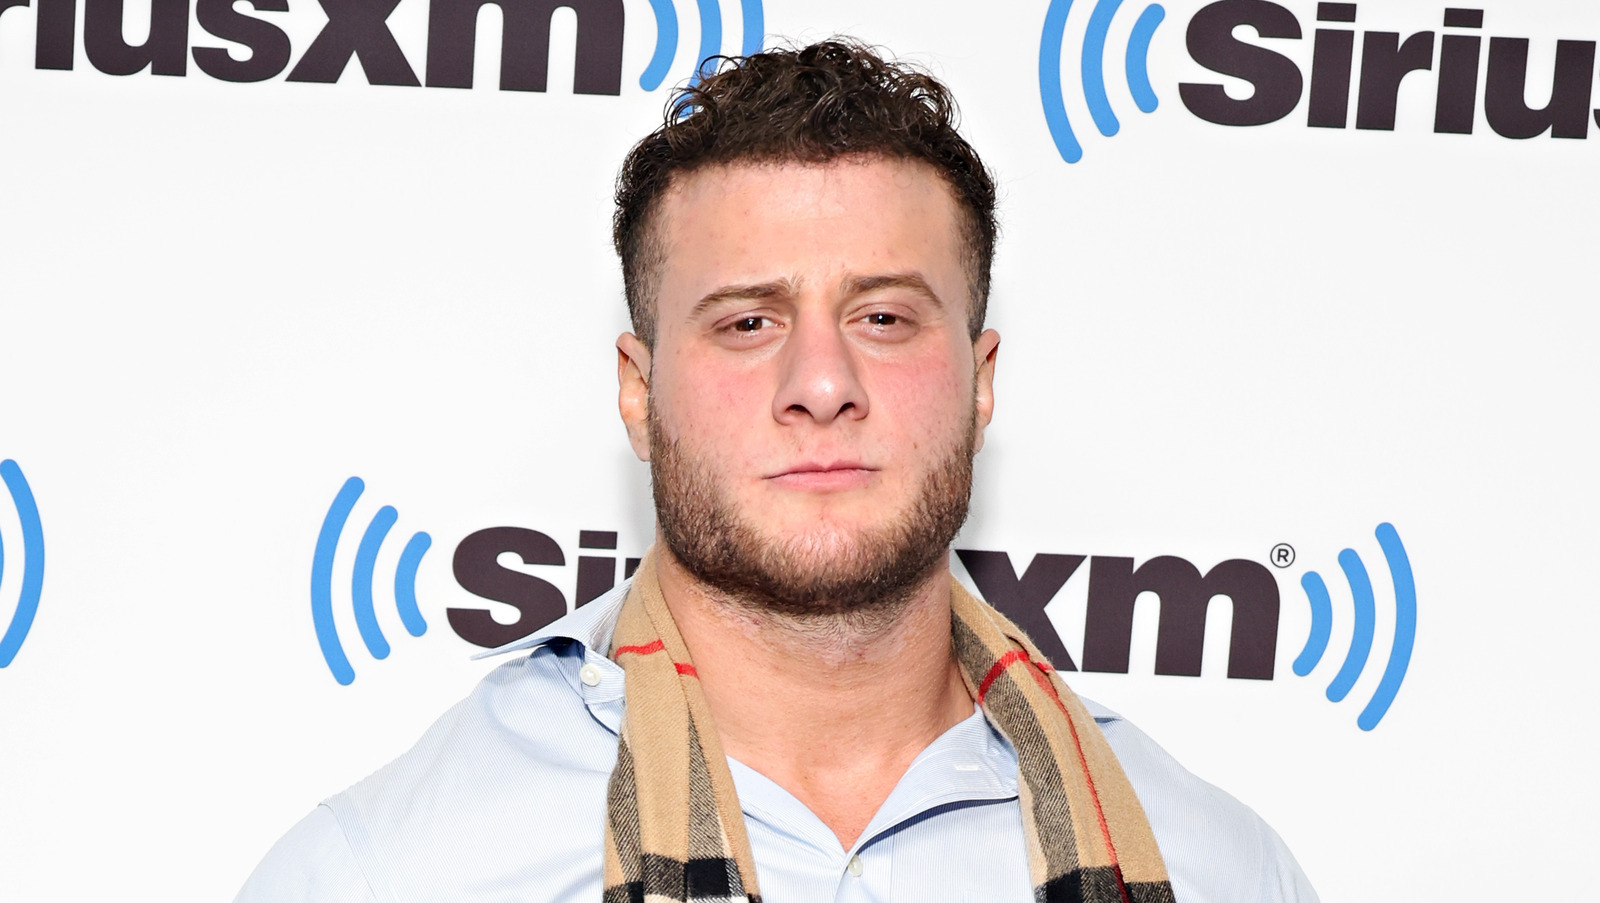 Backstage Update On MJF's Contract Status With AEW